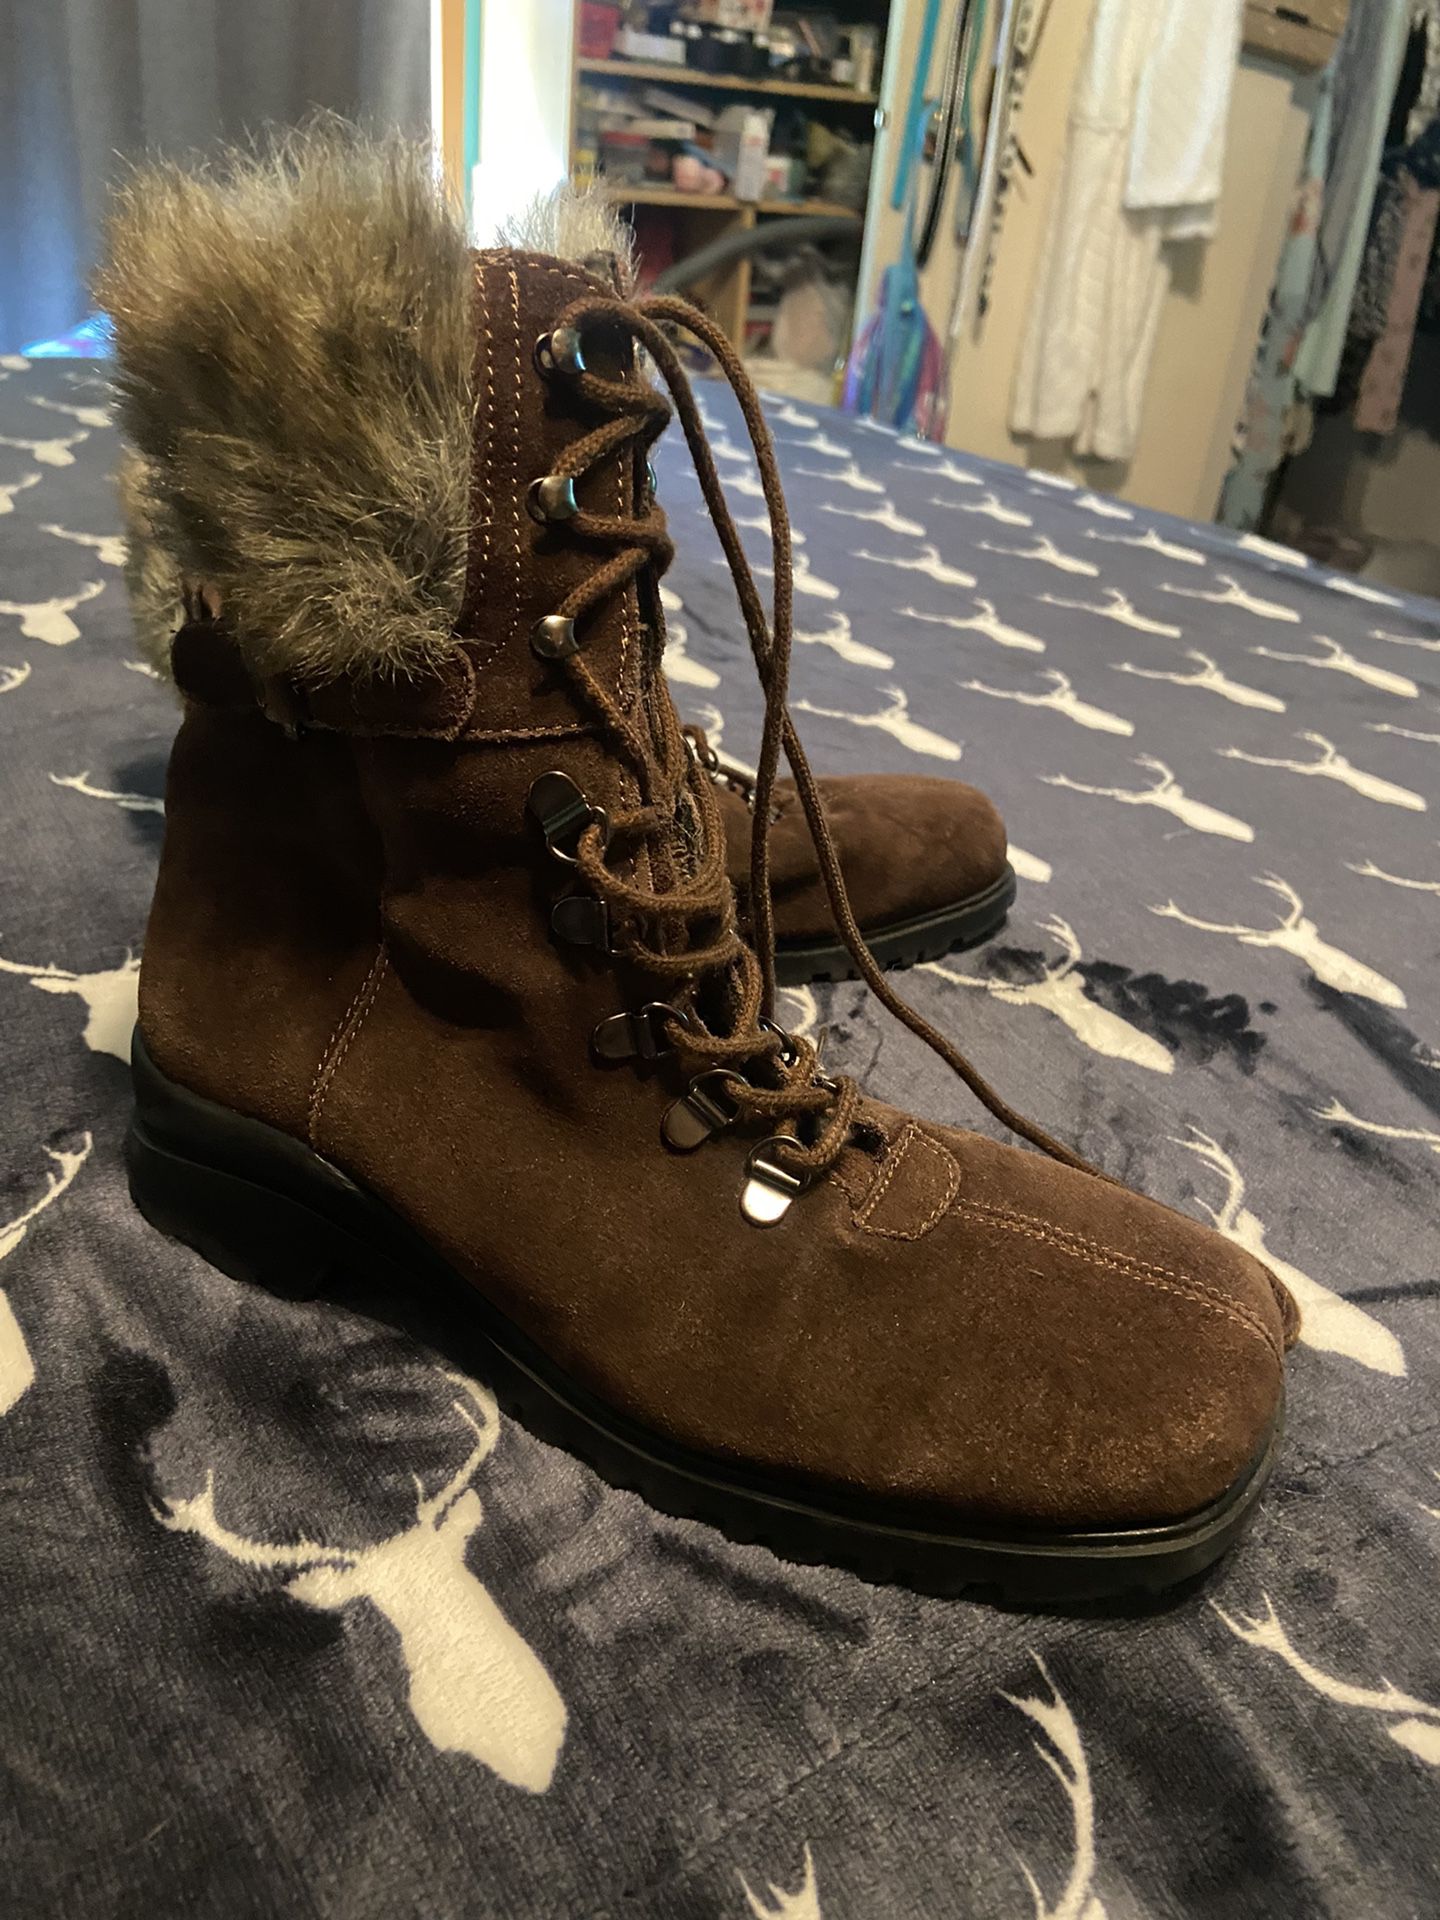 Fastion Bug Fux Fur Top Brown Hiking Boots Sz 6.5